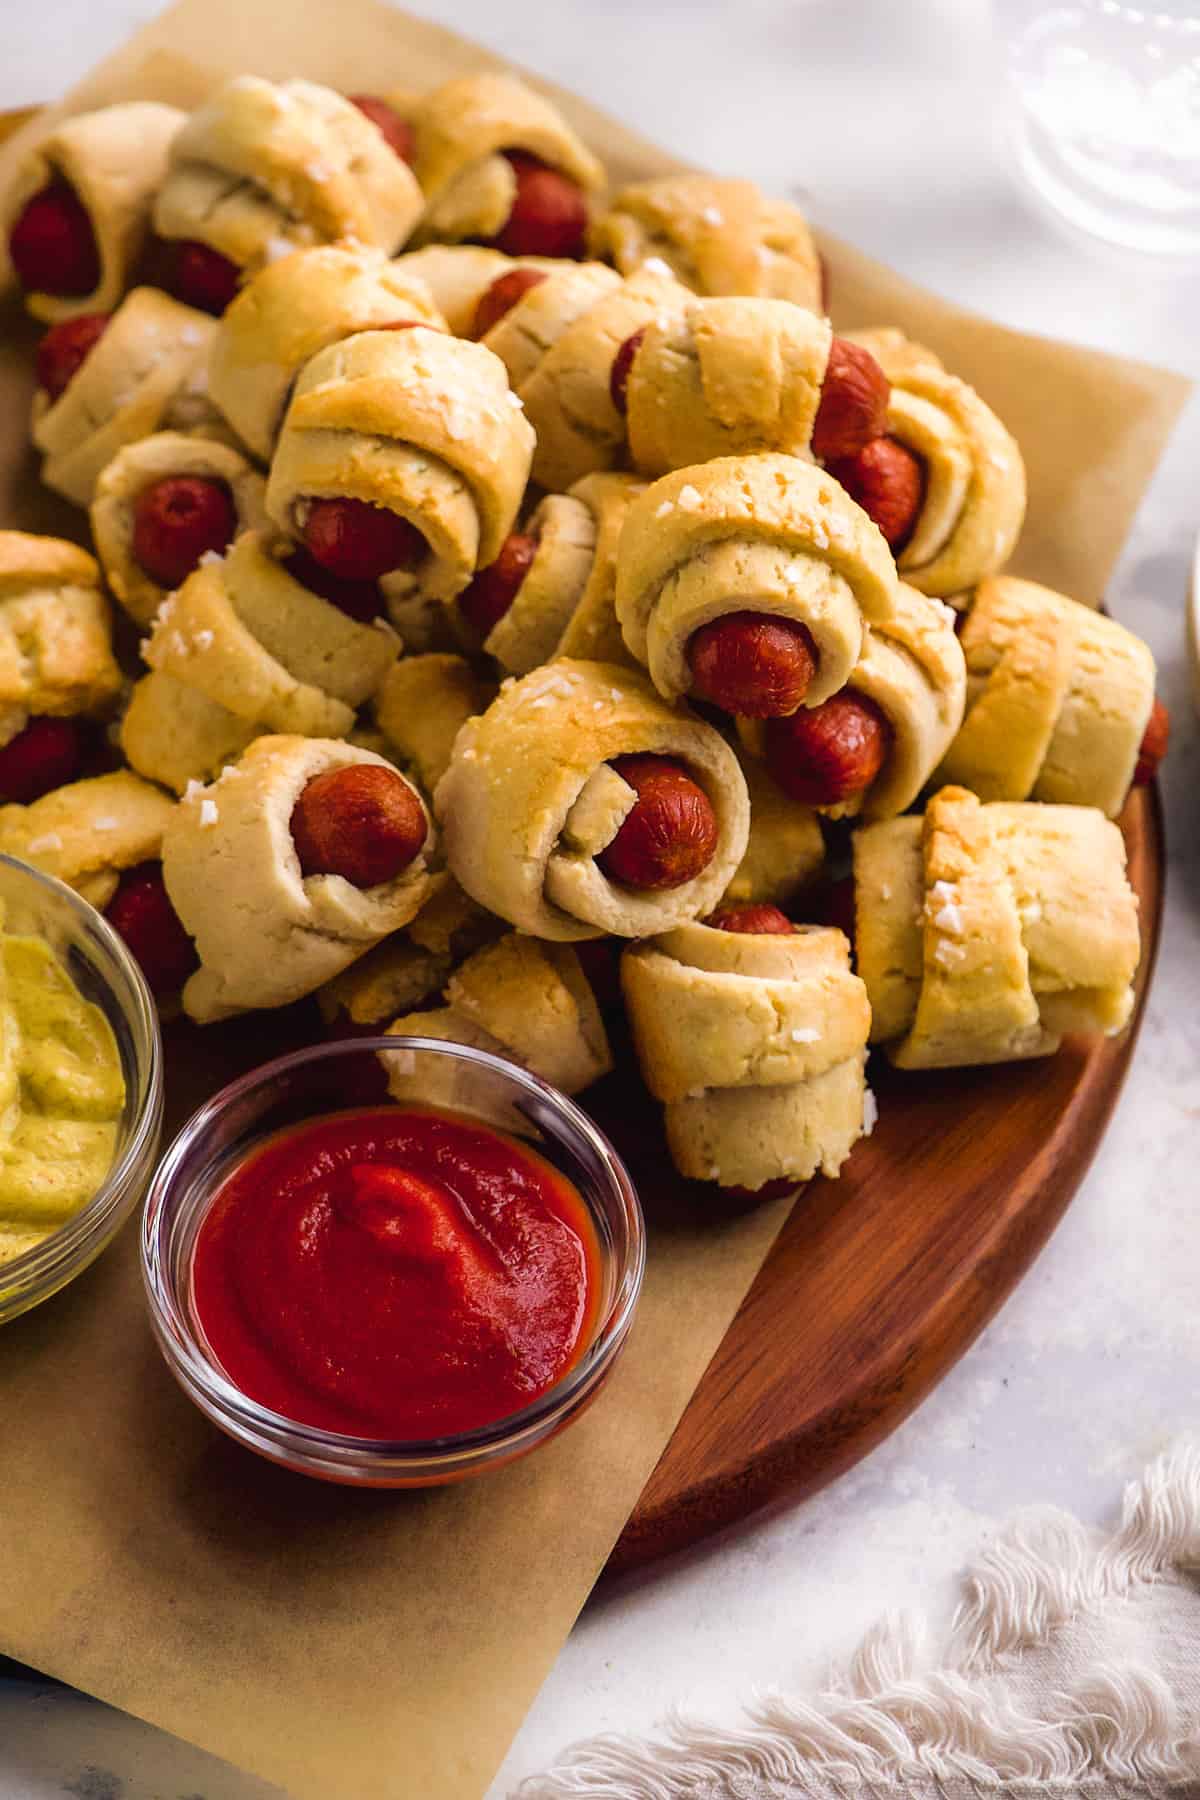 Gluten free pigs in a blanket piled up on a wooden platter with ketchup.